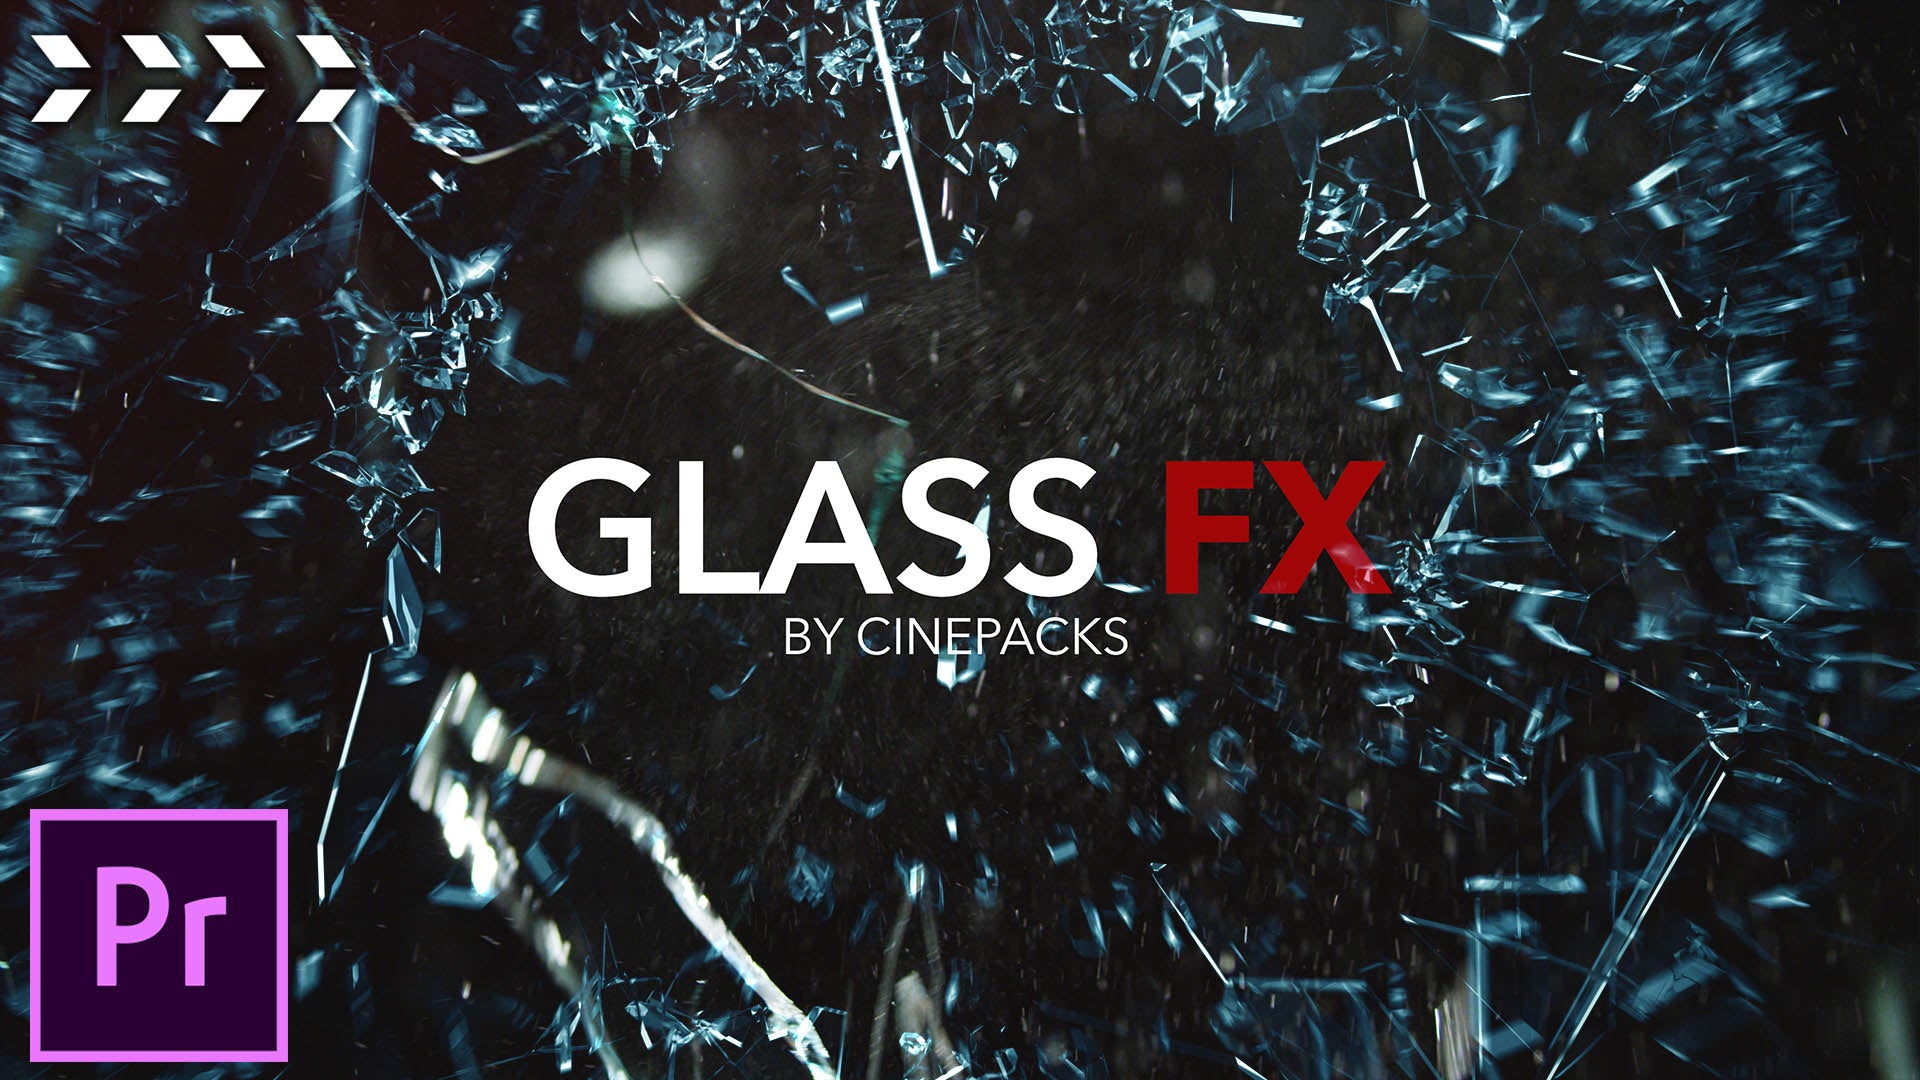 Use CinePacks Glass FX to Shock & Awe Your Audience with Impressive Glass Breaking Video Effects